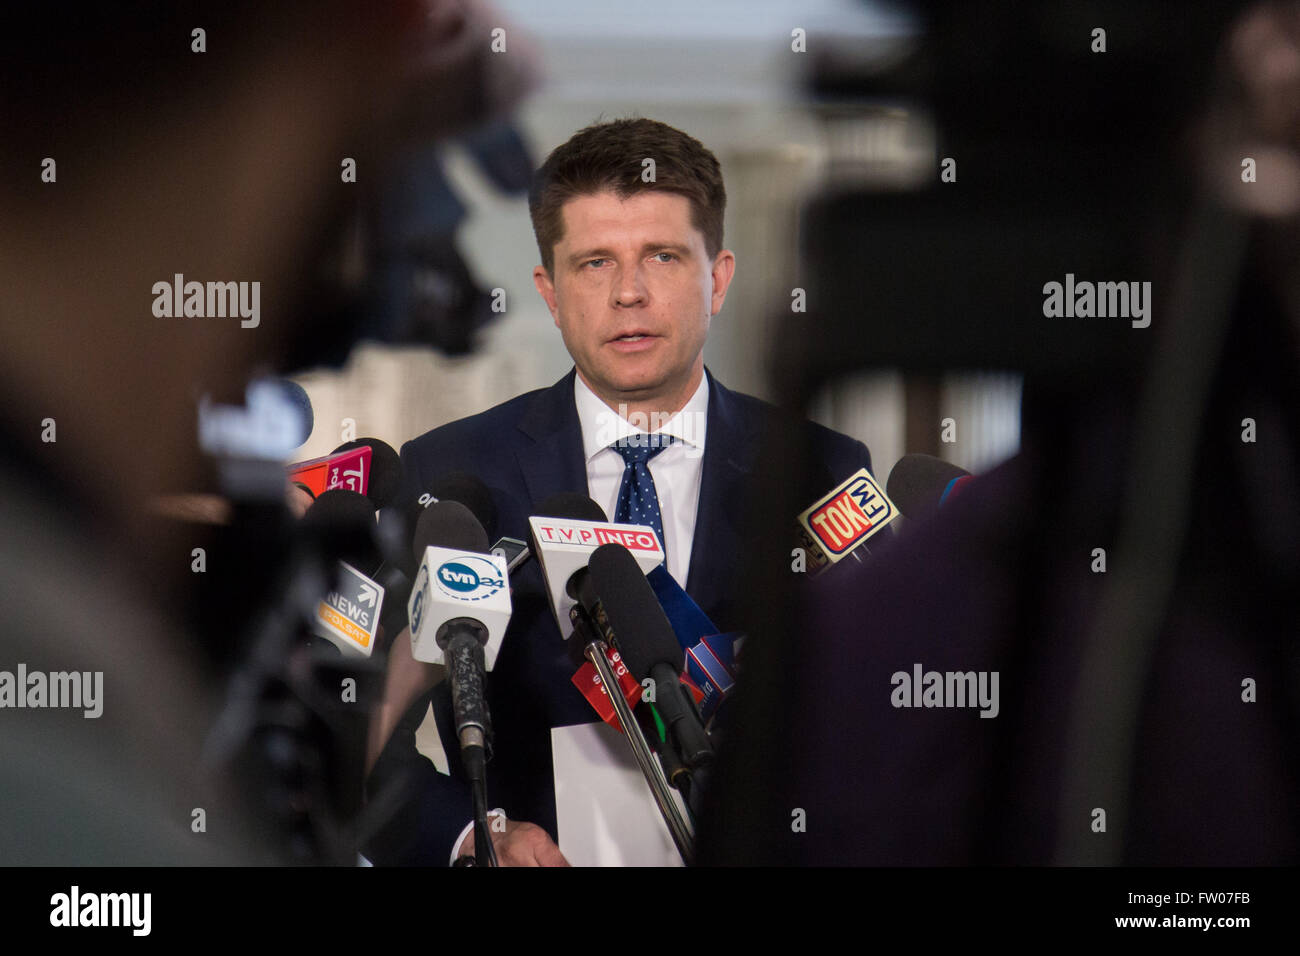 Warsaw, Poland. 31st Mar, 2016. Leader of Modern party (Nowoczesna), Ryszard Petru during a press conference after meeting of leaders of eight polish political parties in a bid to resolve Poland's constitutional crisis. © Mateusz Wlodarczyk/Pacific Press/Alamy Live News Stock Photo